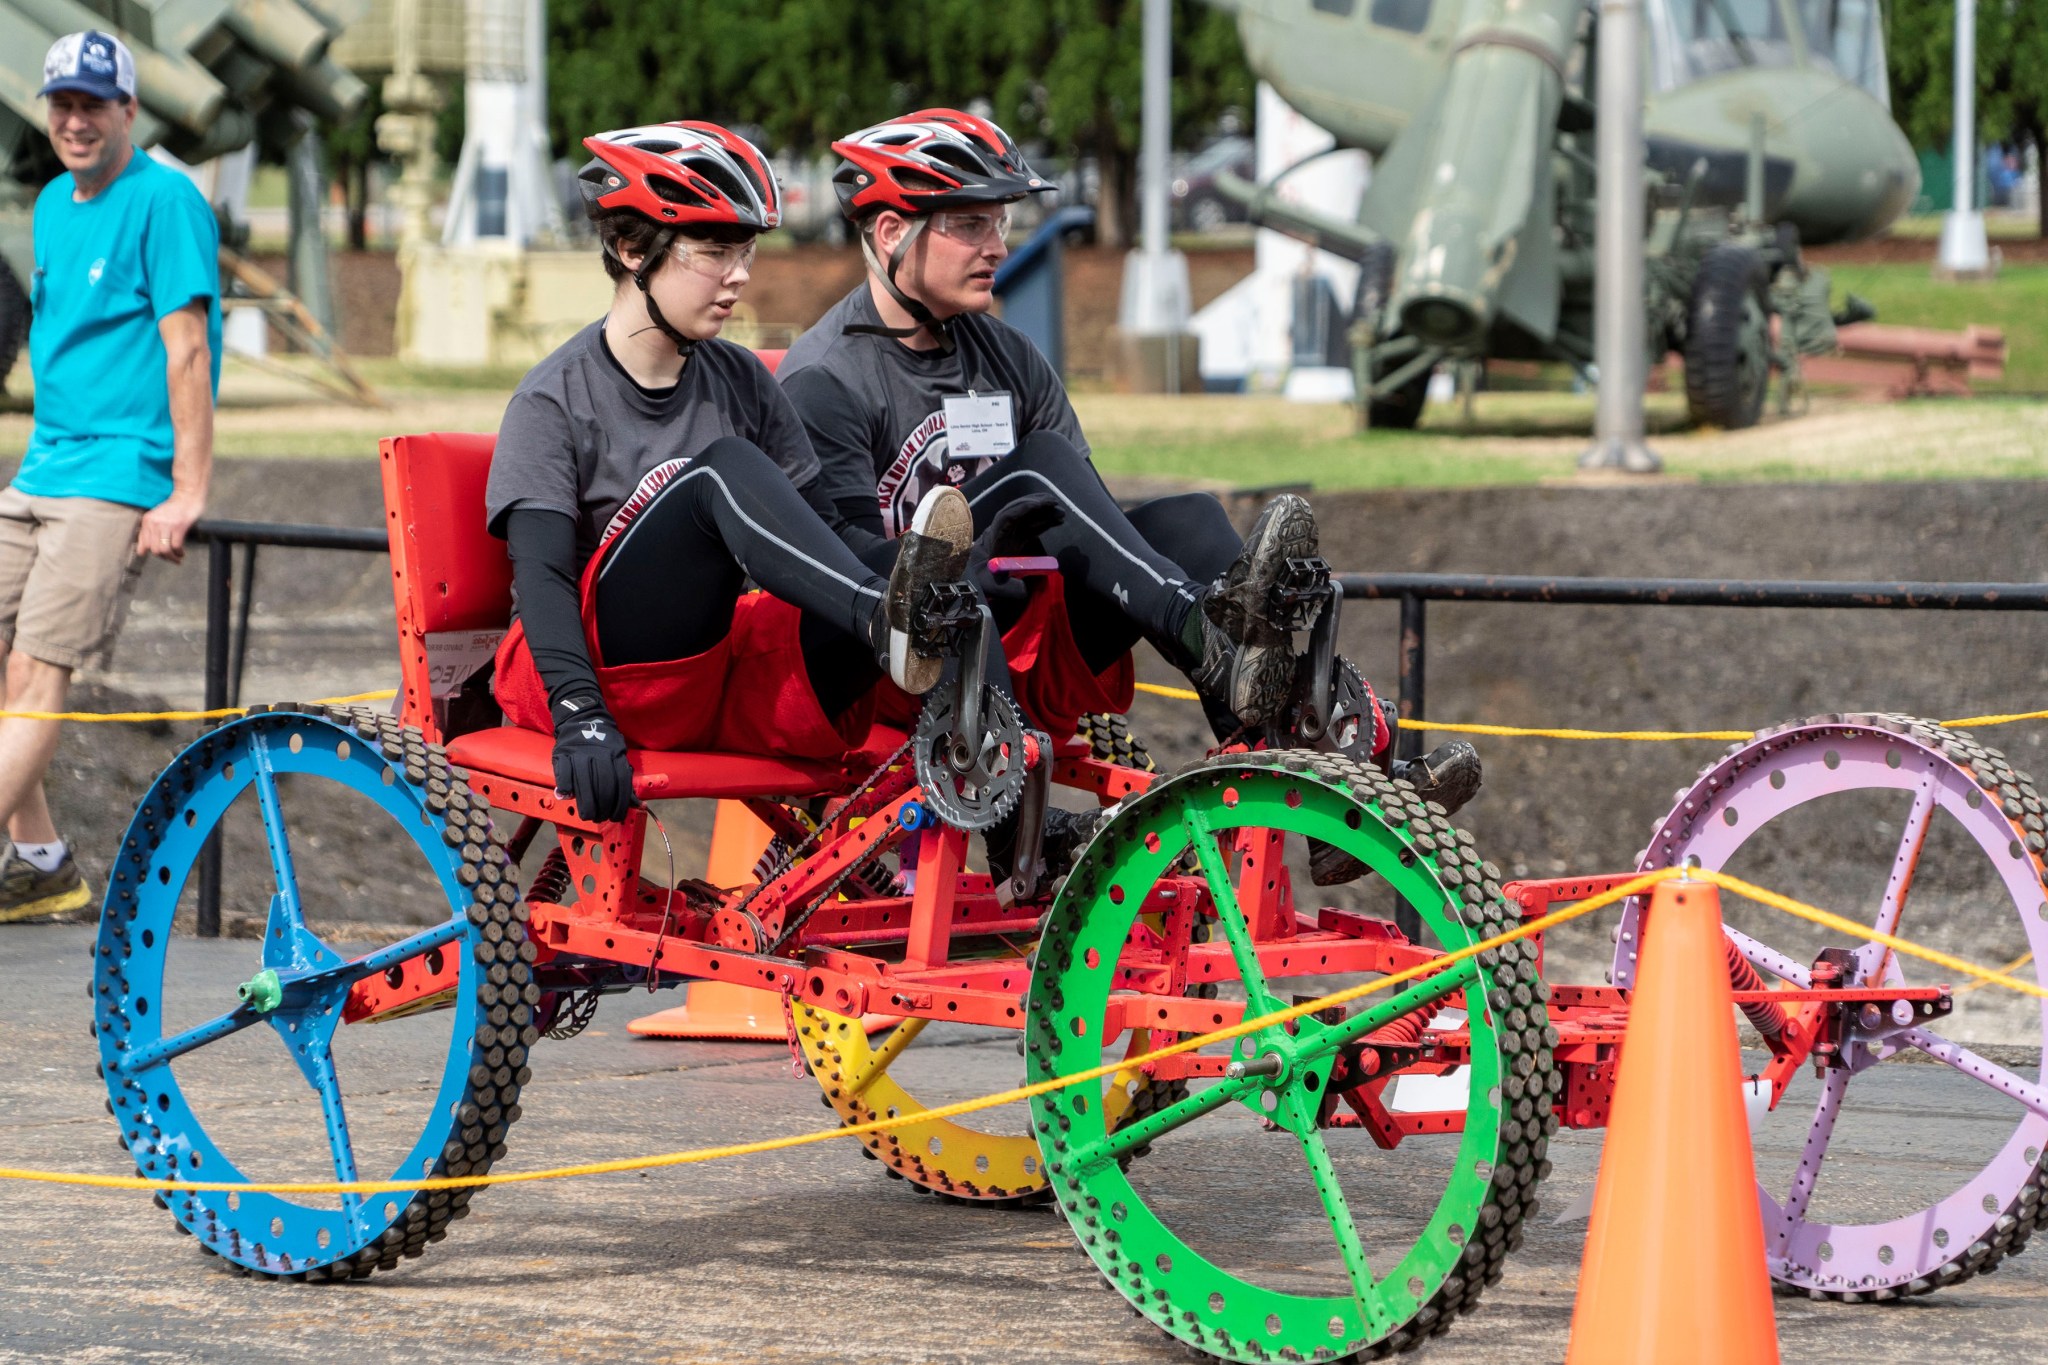 Nearly 100 teams took part in the 2019 Human Exploration Rover Challenge, held last April at the U.S. Space & Rocket Center. 